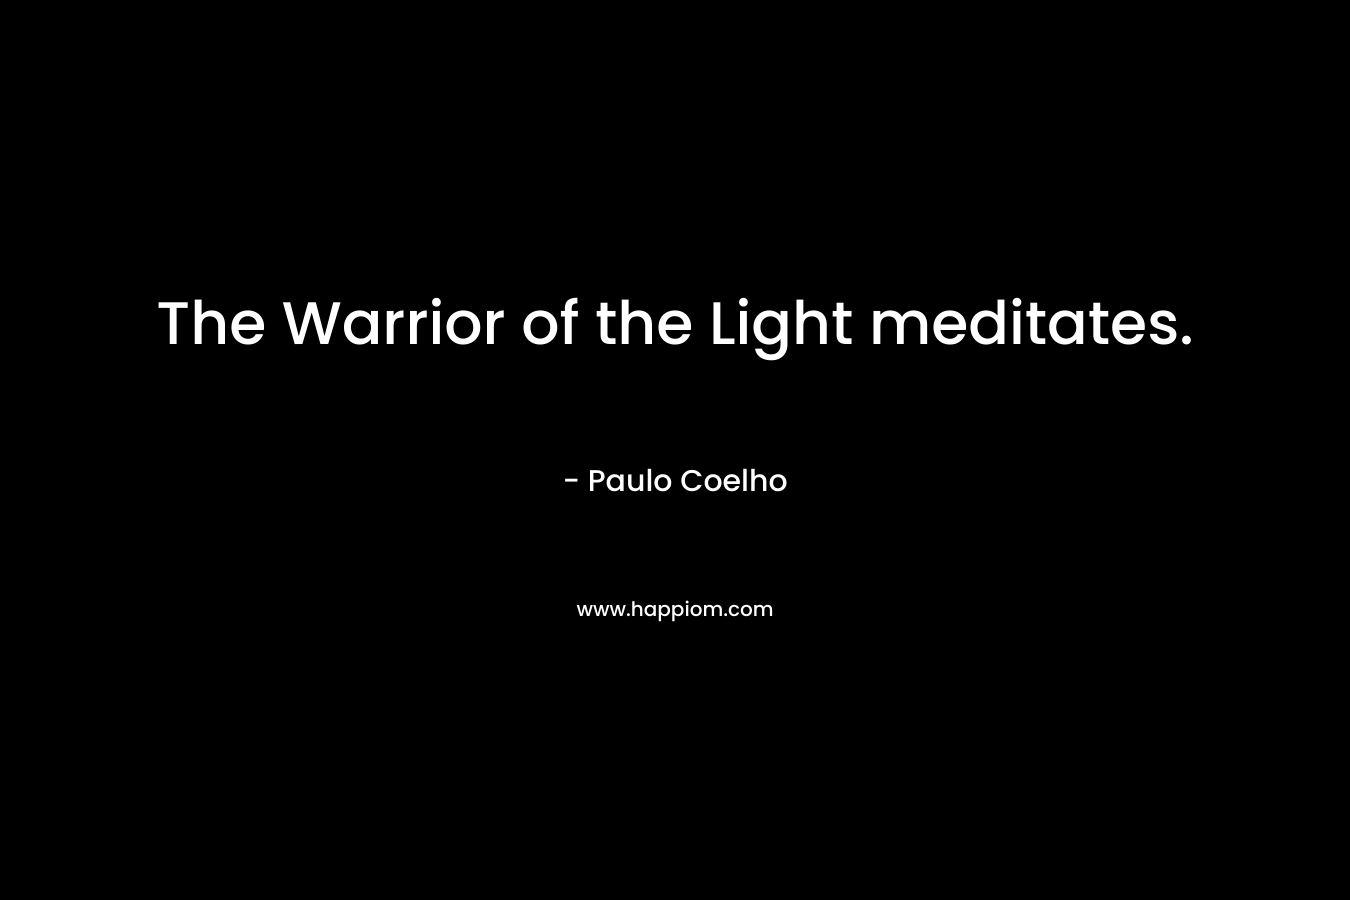 The Warrior of the Light meditates.